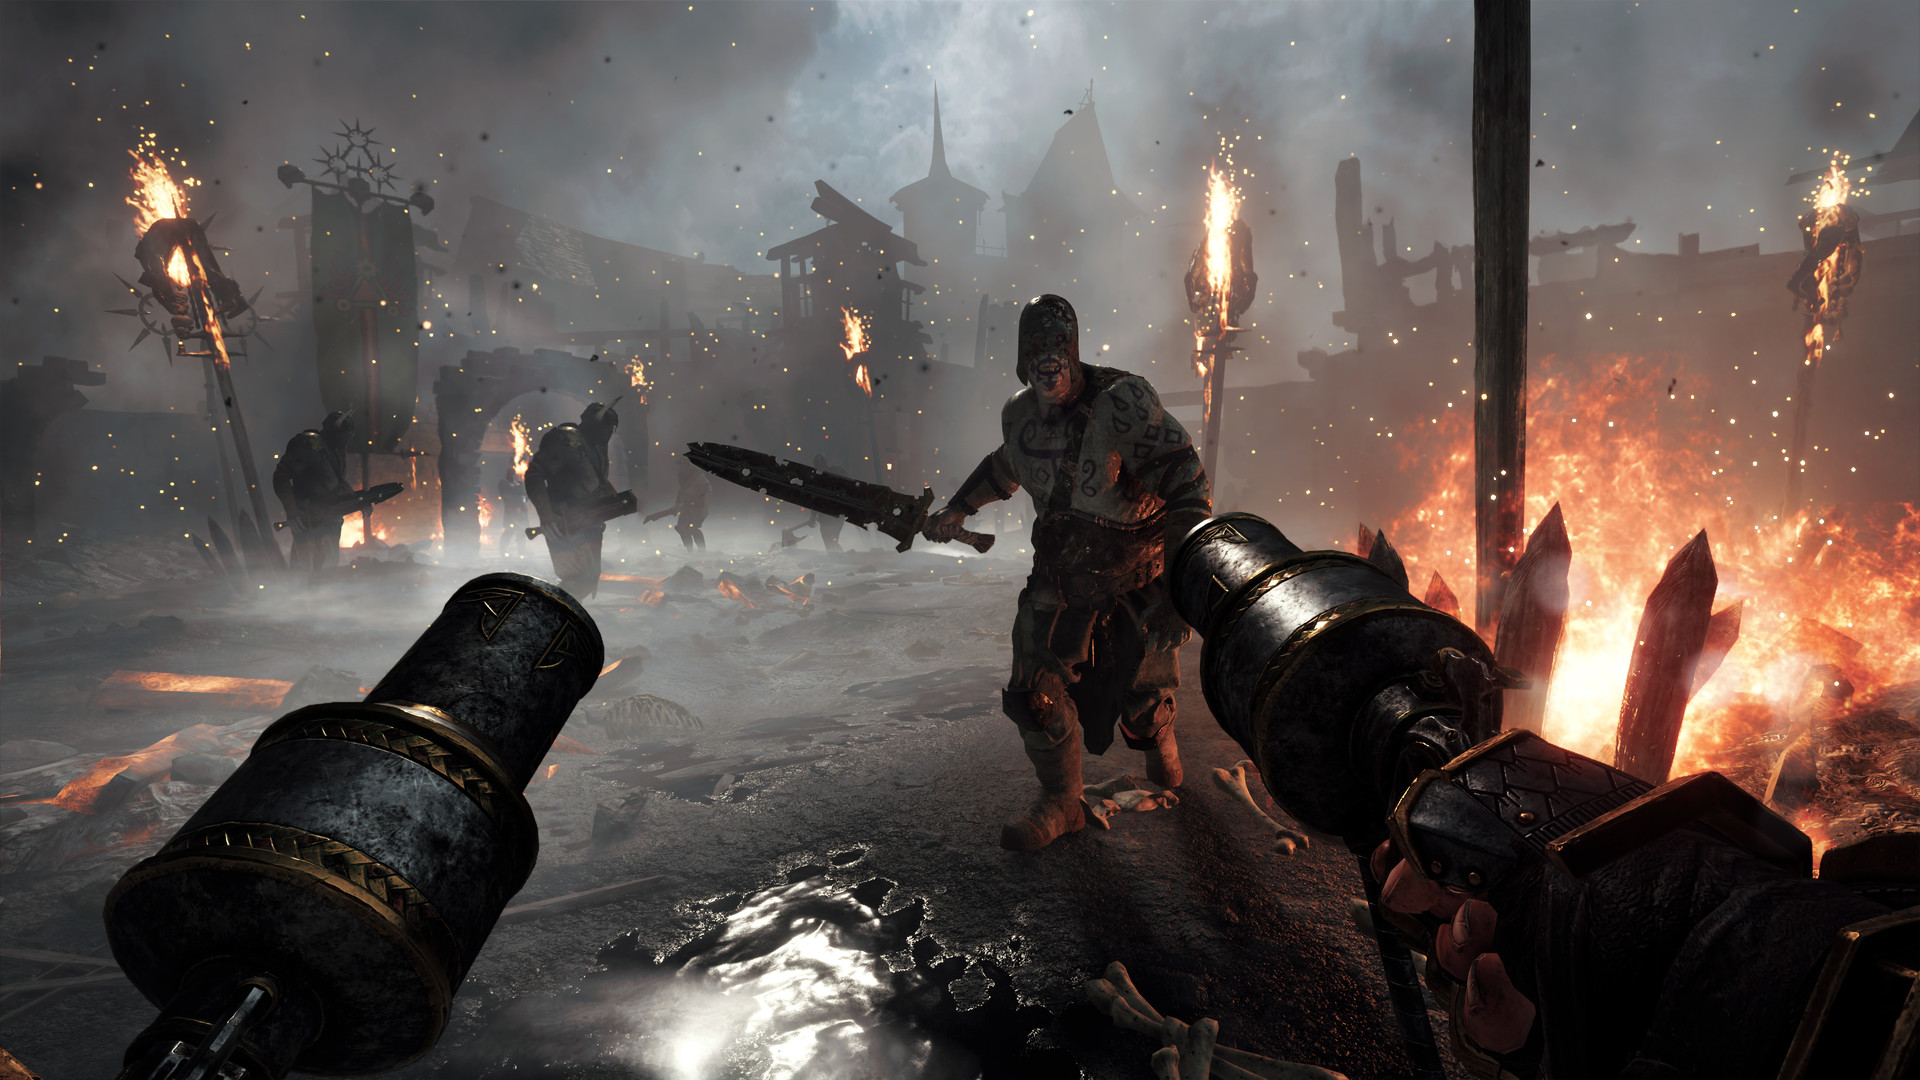 Be’lakor enters the Chaos Wastes in new Warhammer: Vermintide 2 update